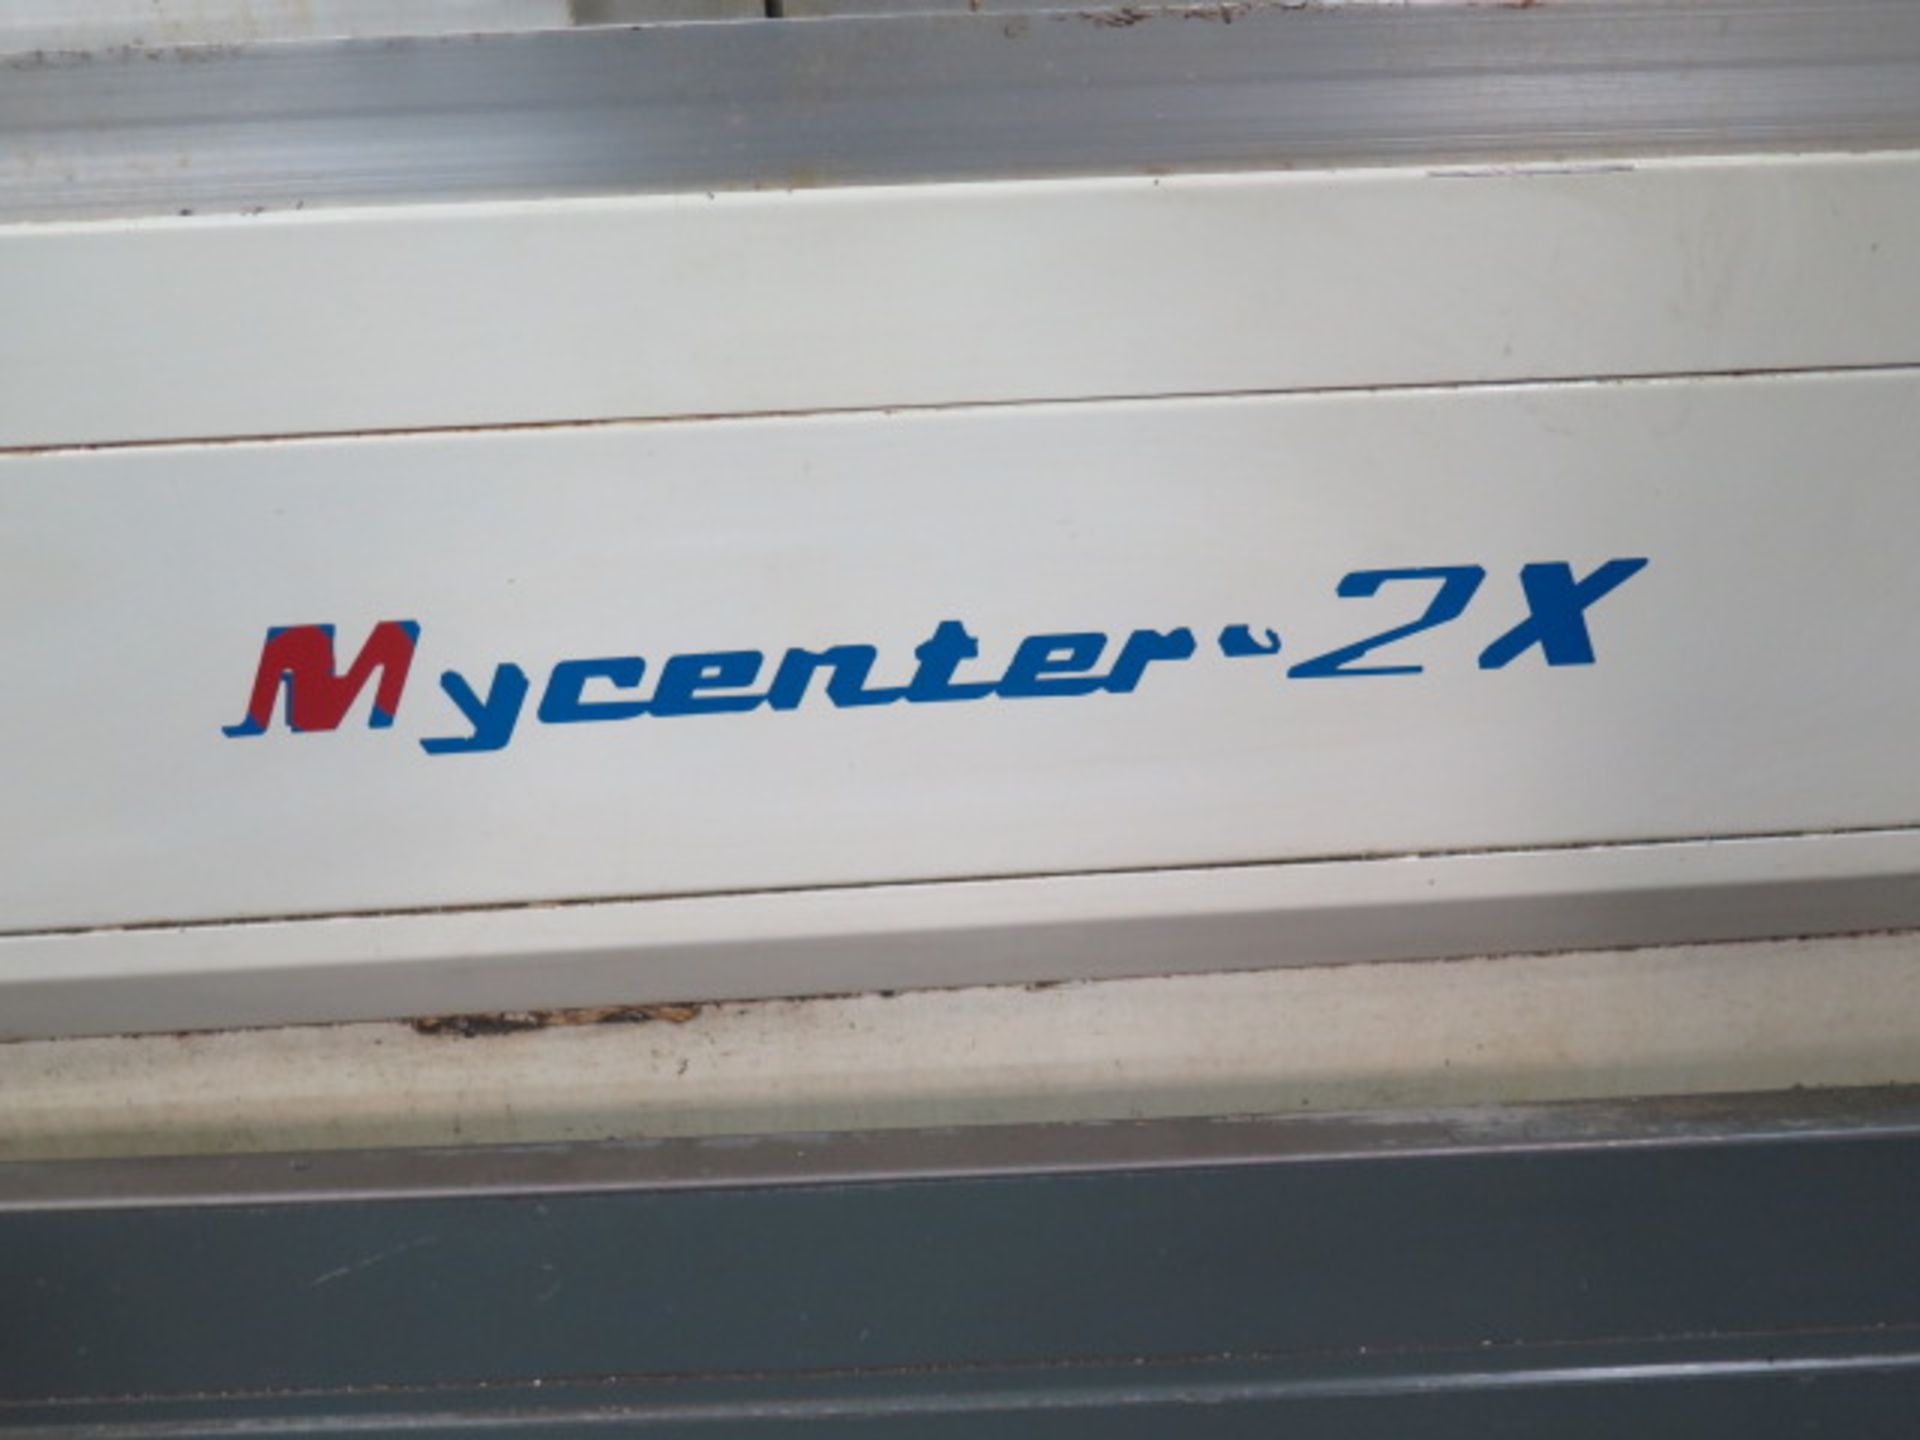 1998 Kitamura Mycenter-2X CNC VMC s/n 07120 w/ Yasnac i80 Controls, 20-Station, SOLD AS IS - Image 6 of 23